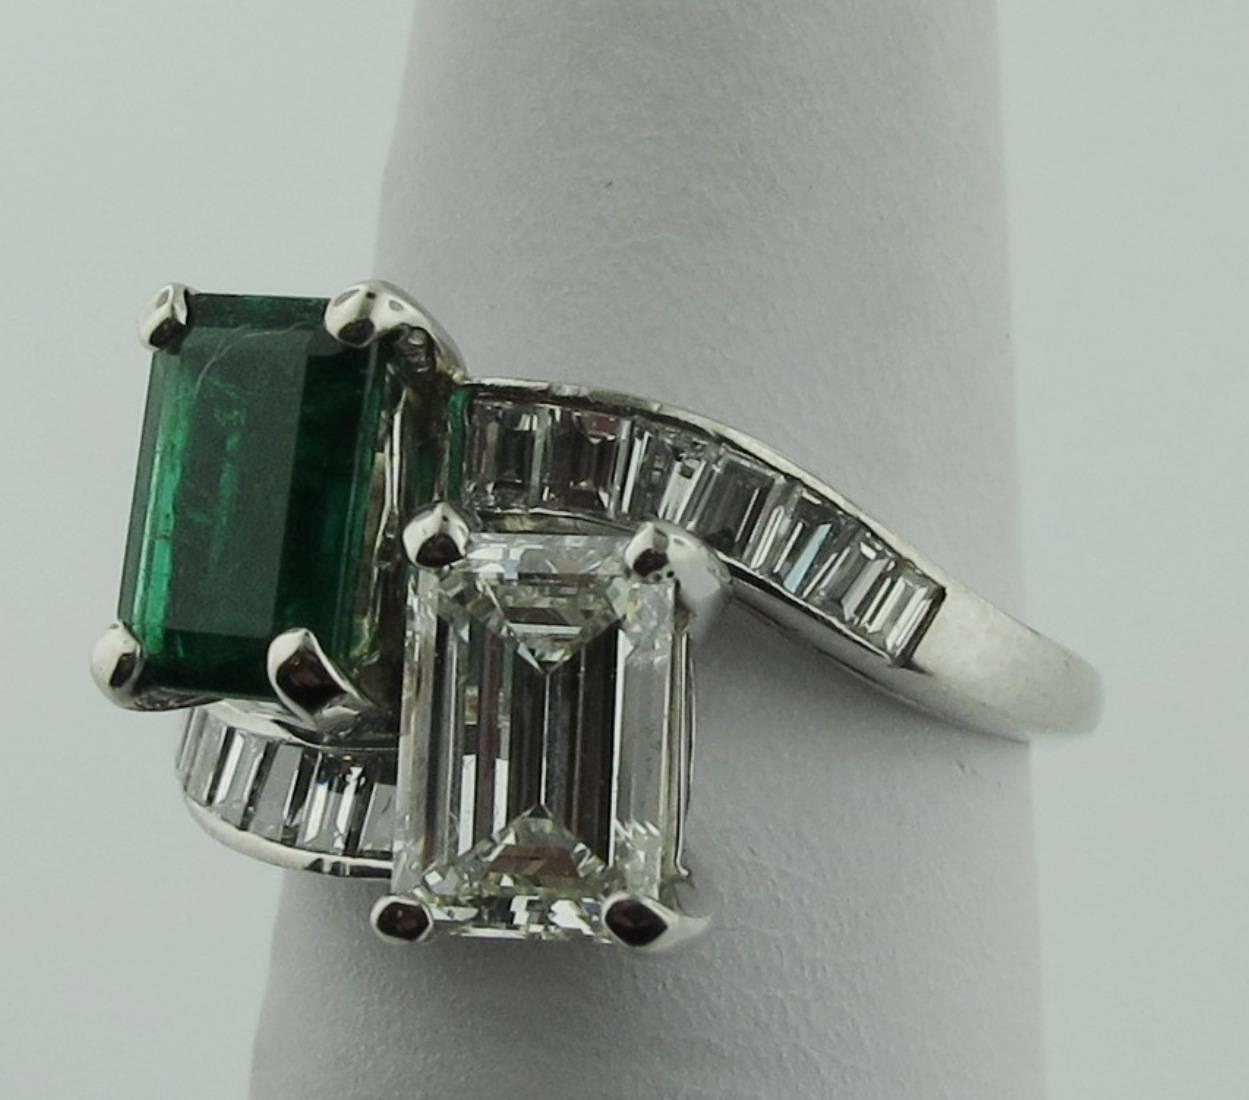 Two stone, Cross-over Emerald and Diamond ring set in platinum.  The 1.47 carat diamond is accompanied by GIA certificate #1186880170. The diamond is H color, VVS-2.  The emerald cut Emerald weighs 1.46 carats.  There are 14 baguette diamonds on the